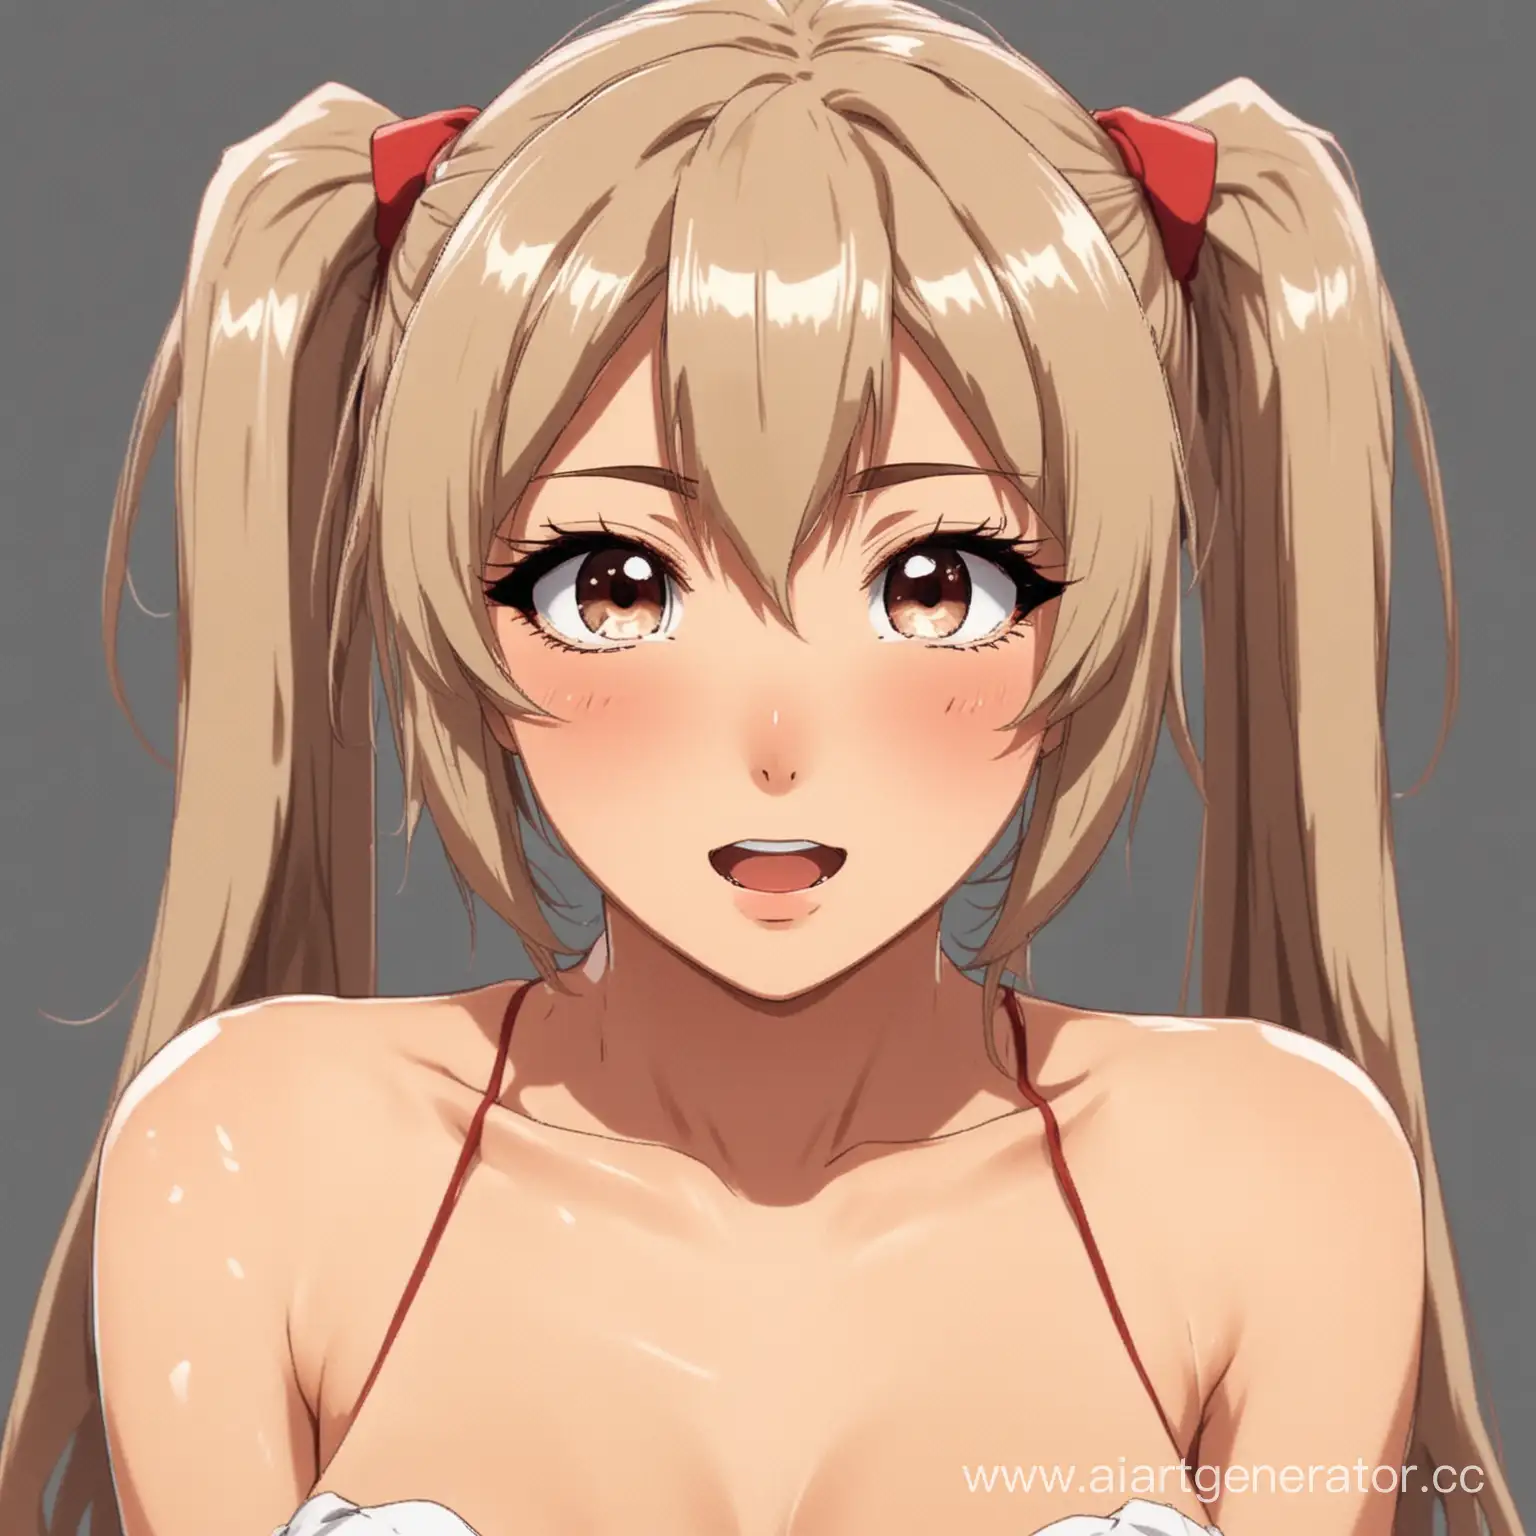 Anime-AhegaoHentai-Avatar-Art-Without-Explicit-Content